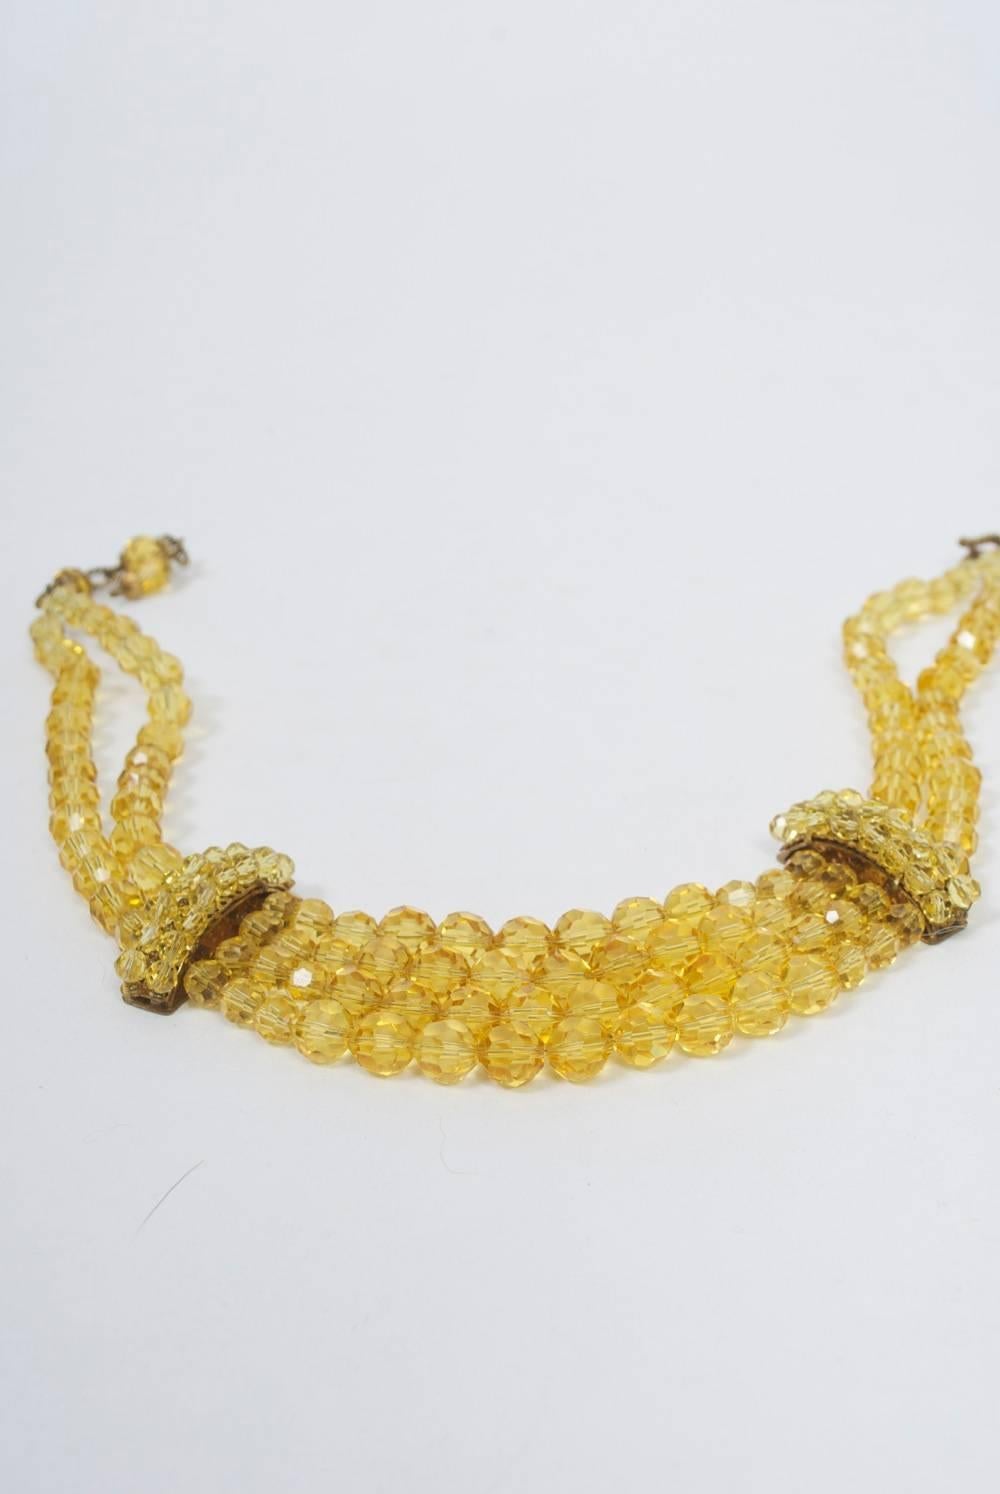 Women's Yellow Crystal Necklace, Coppola e Toppo? For Sale